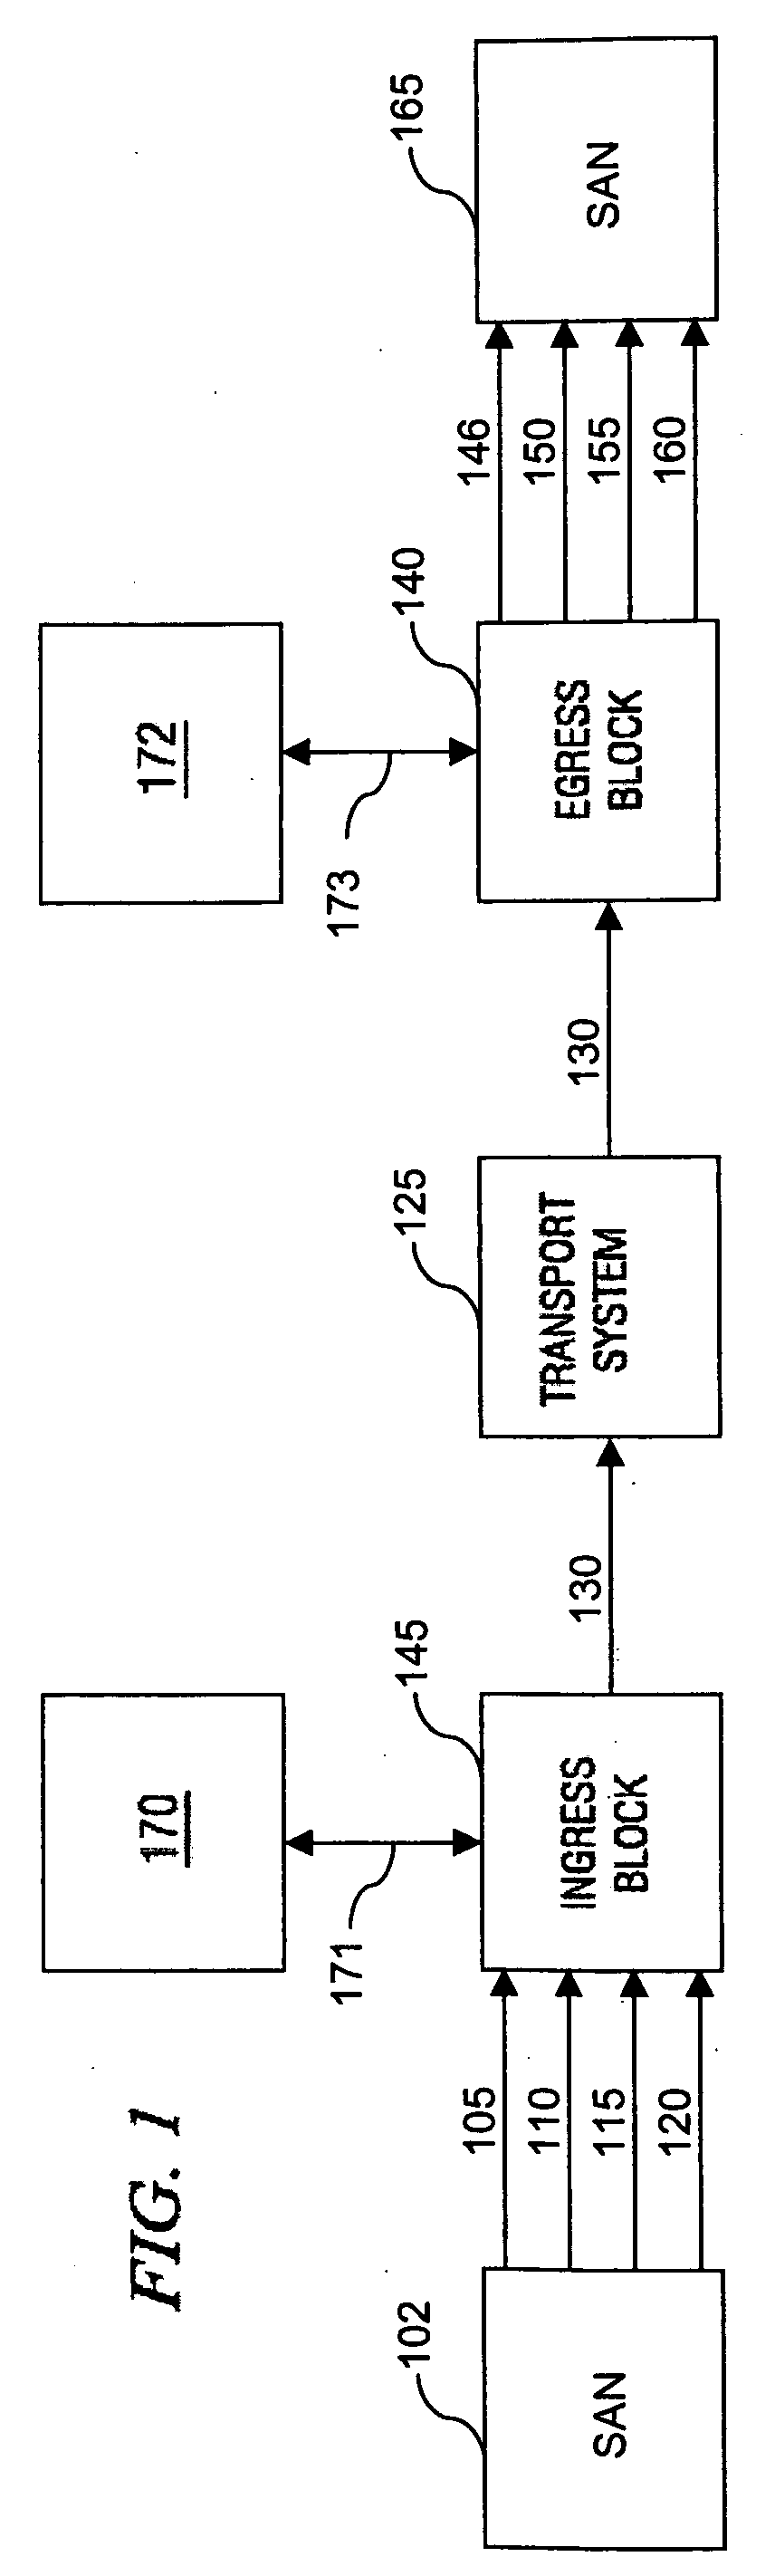 Apparatus and method for fibre channel distance extension embedded within an optical transport system